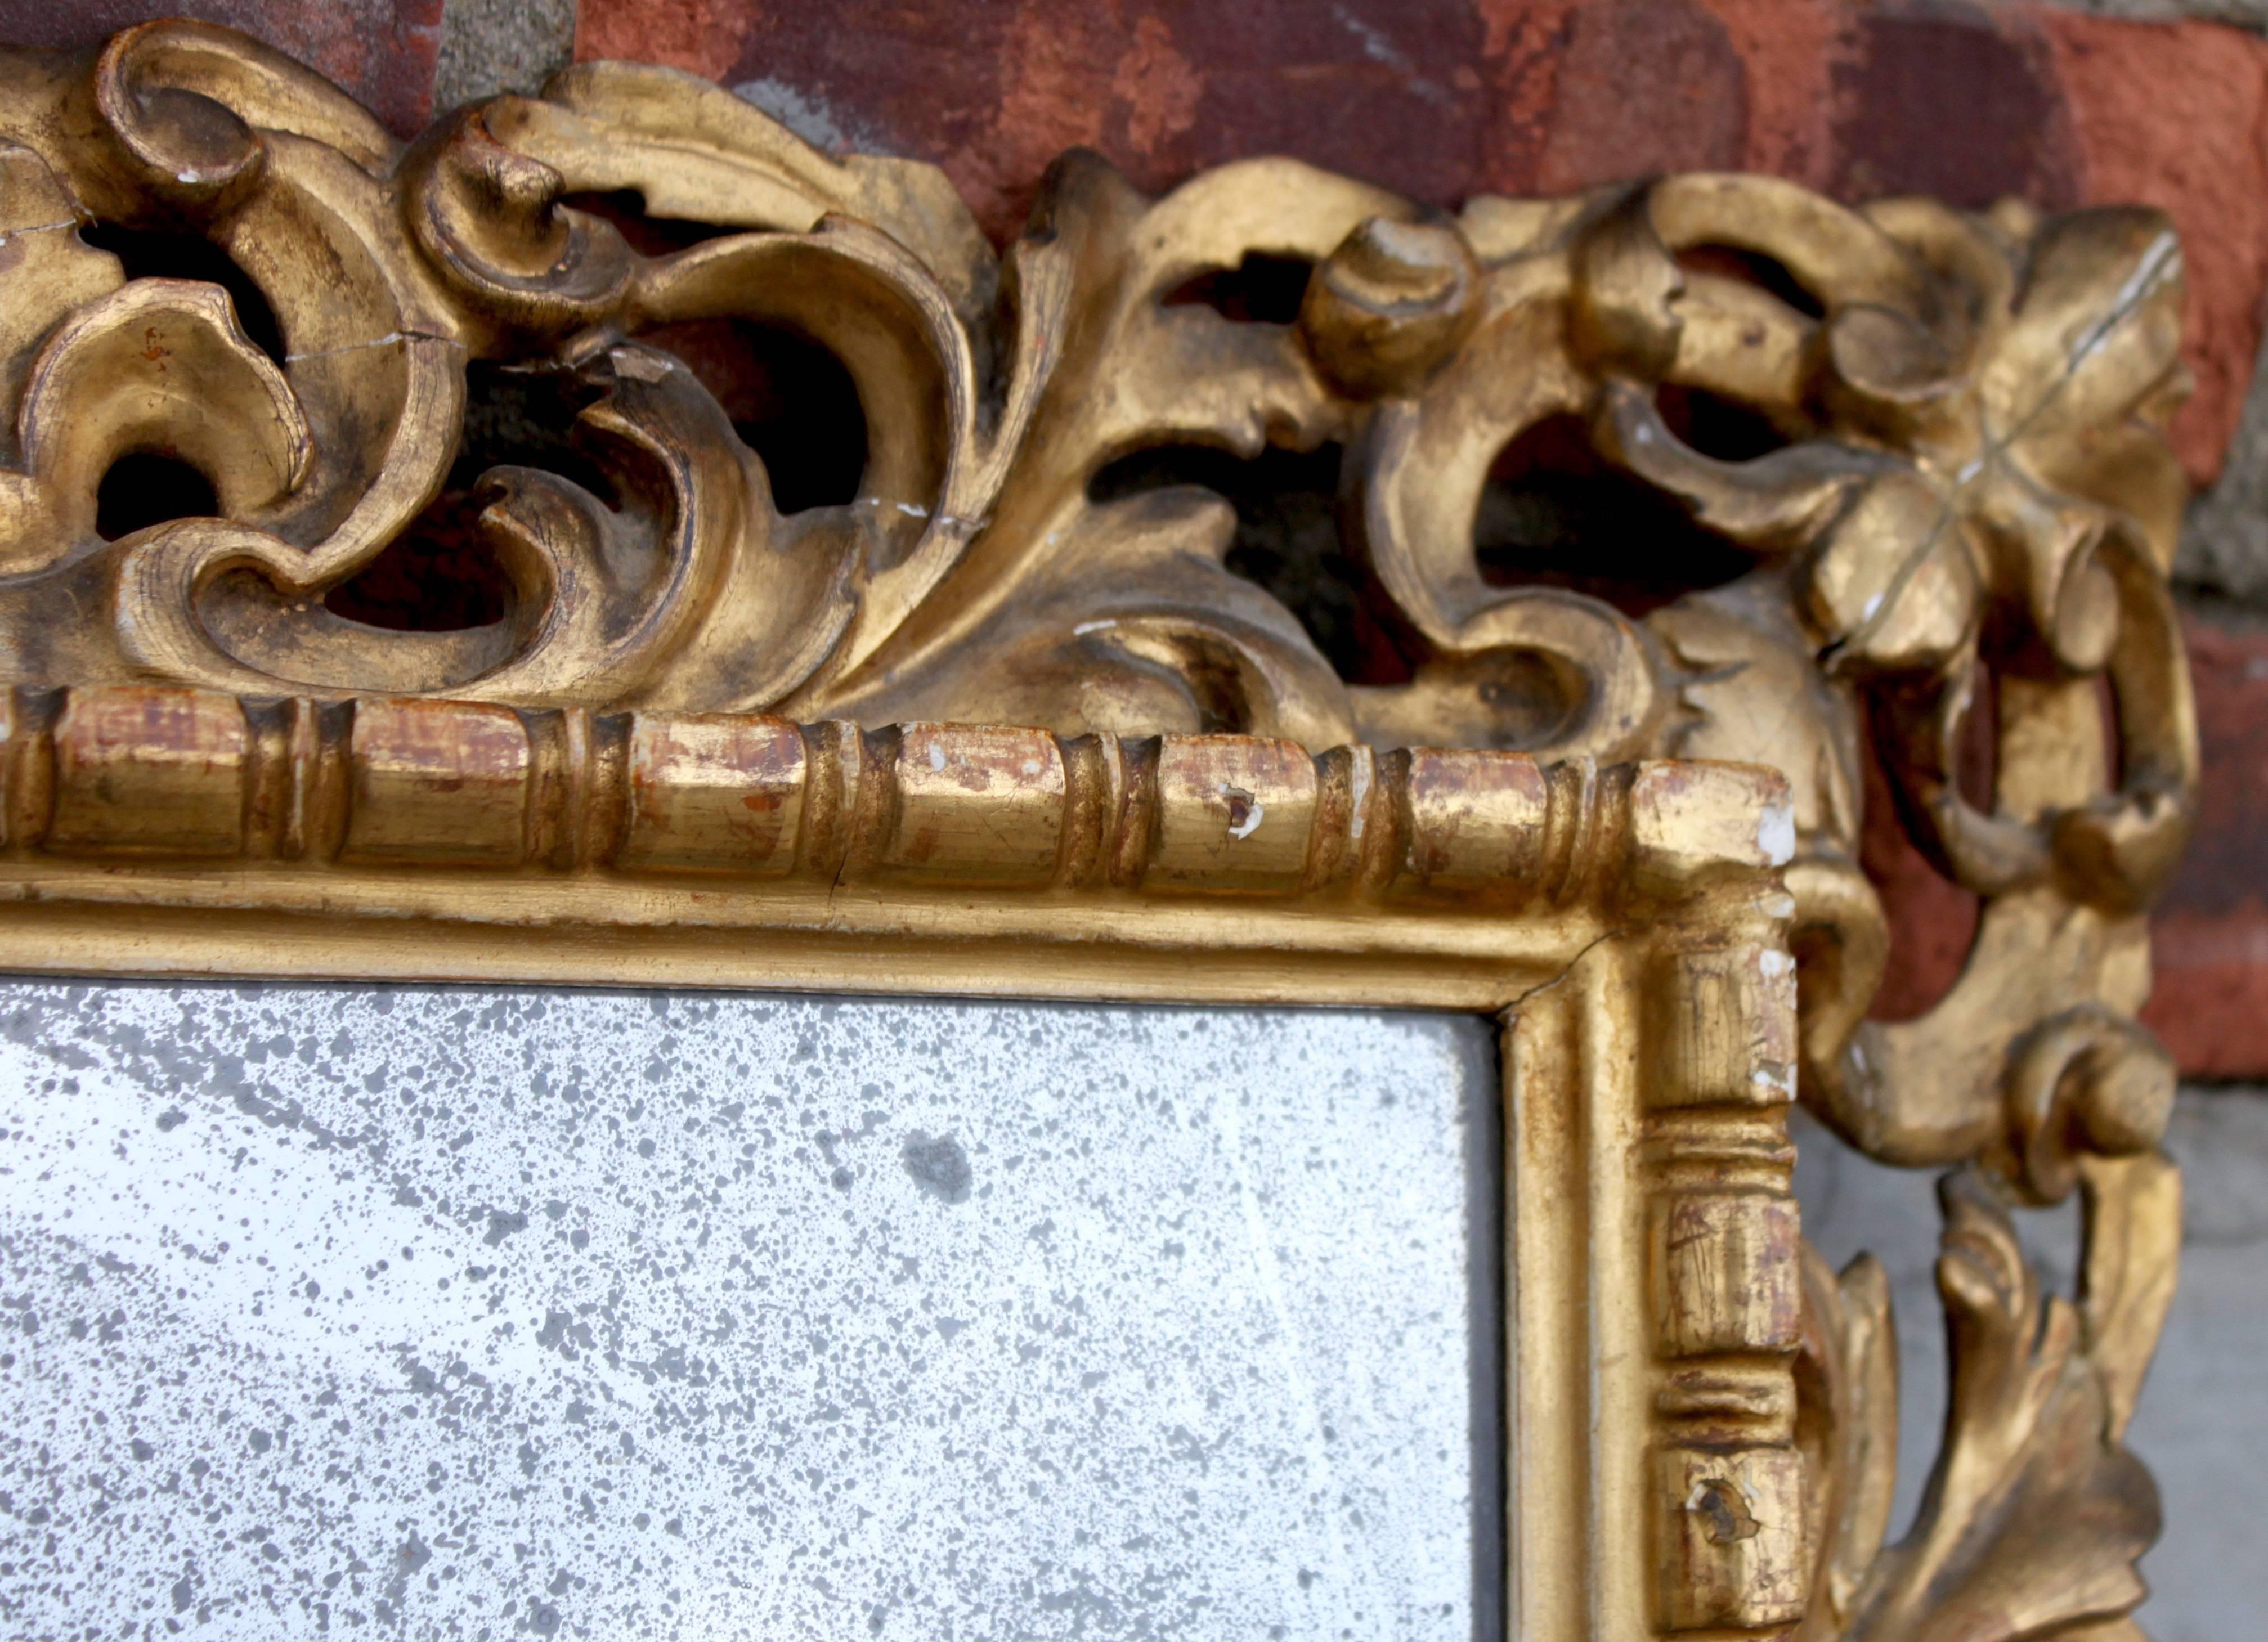 Intricate gilt woodcarving in excellent condition, mirror in original condition with vintage foil distress.